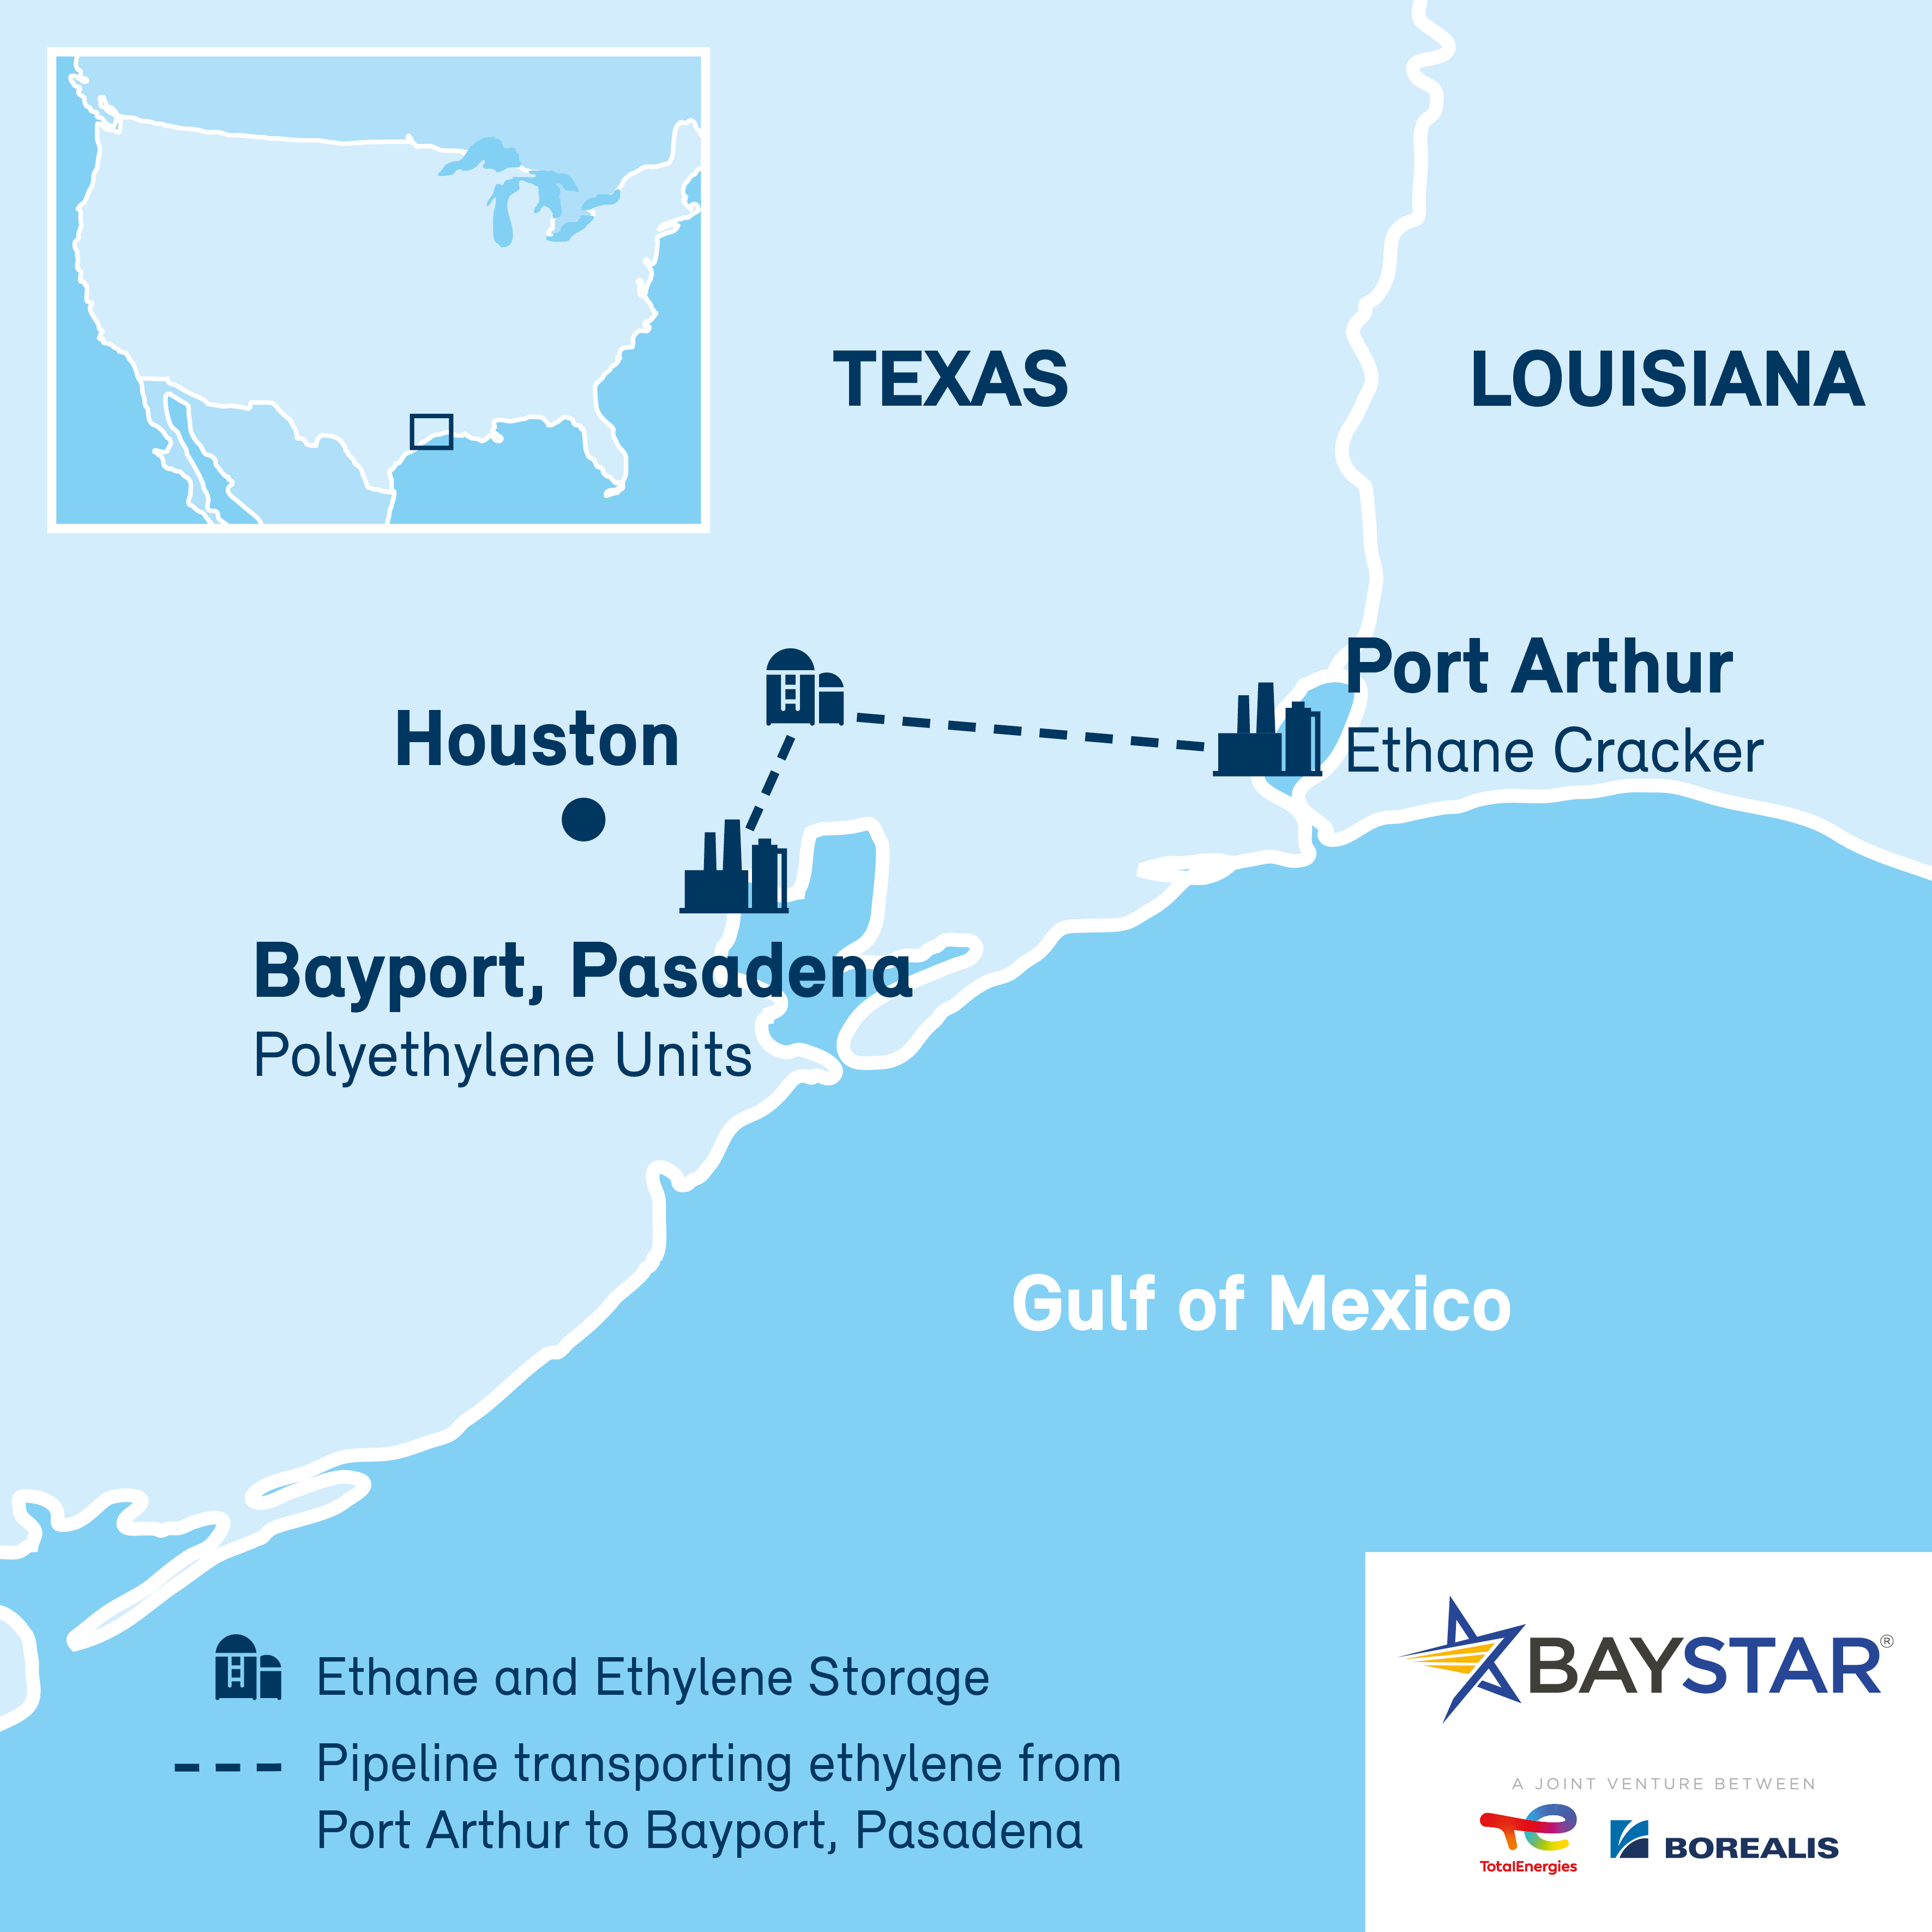 Borealis announces the start-up of New Ethane Cracker at its Joint Venture Baystar in Port Arthur, Texas